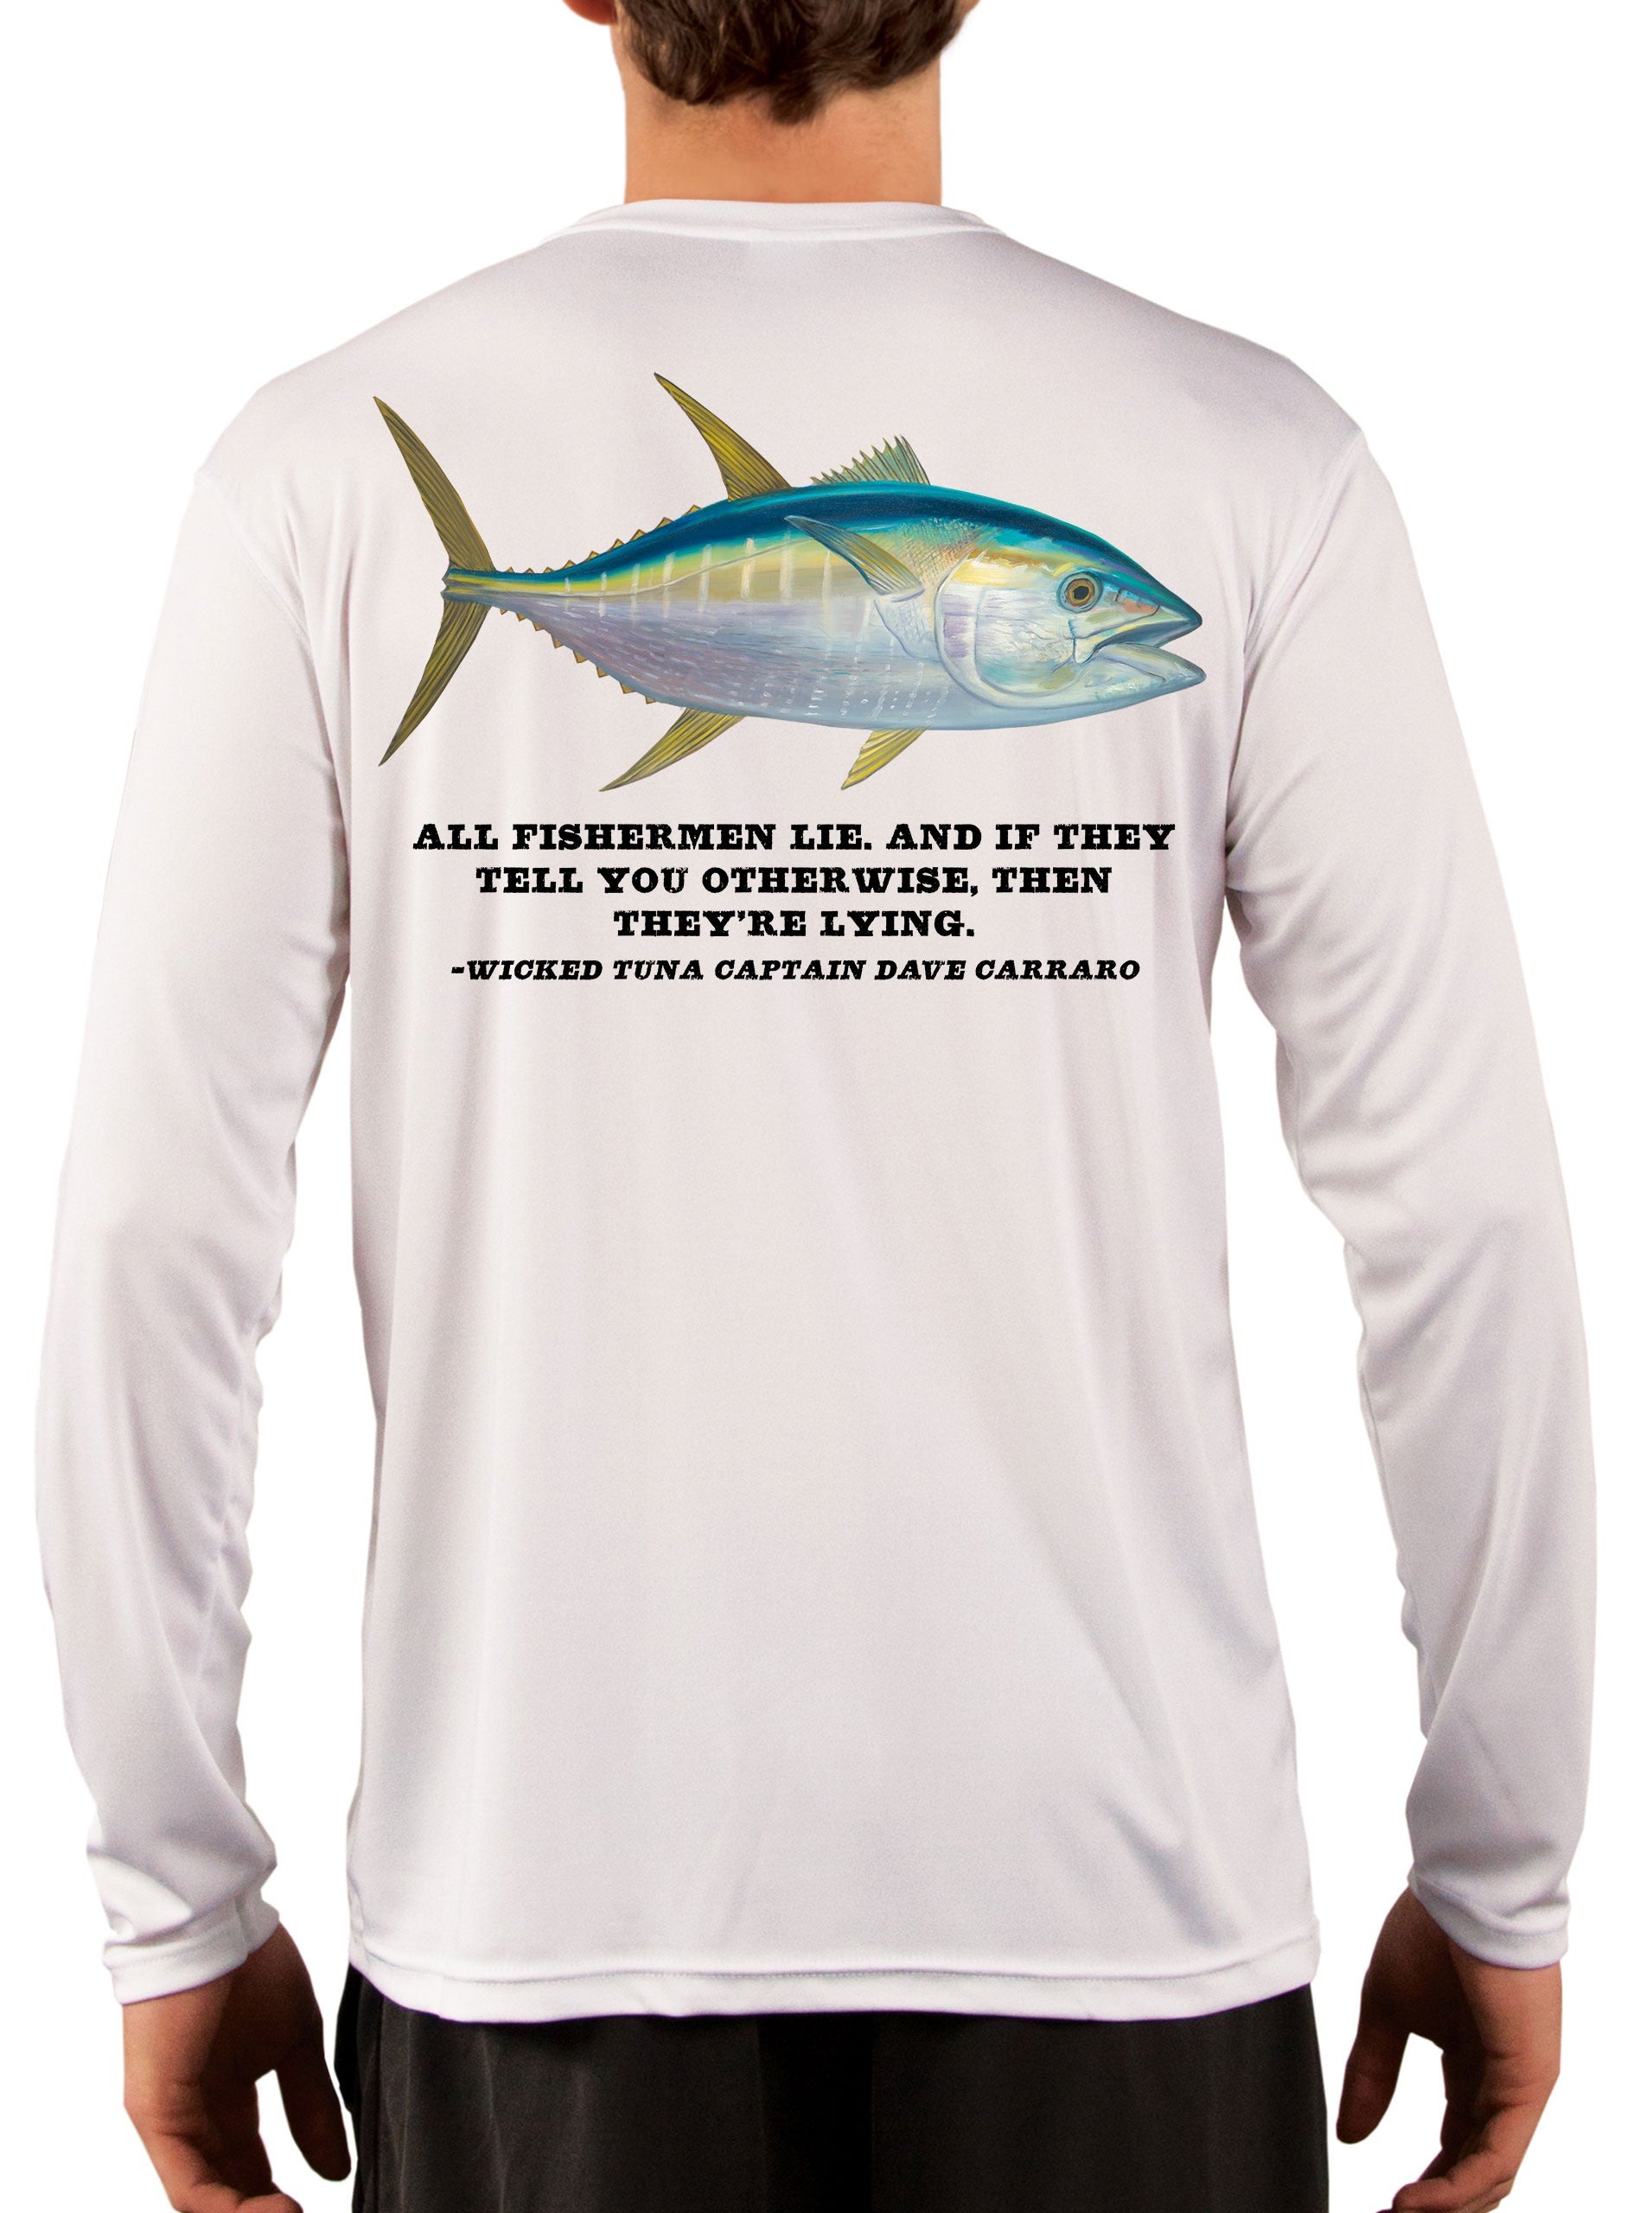 Big and Tall Mens Clothing - UV Protected Fishing T Shirt +50 Sun Protection with Moisture Wicking Technology - Up to 4XL 4XL / White